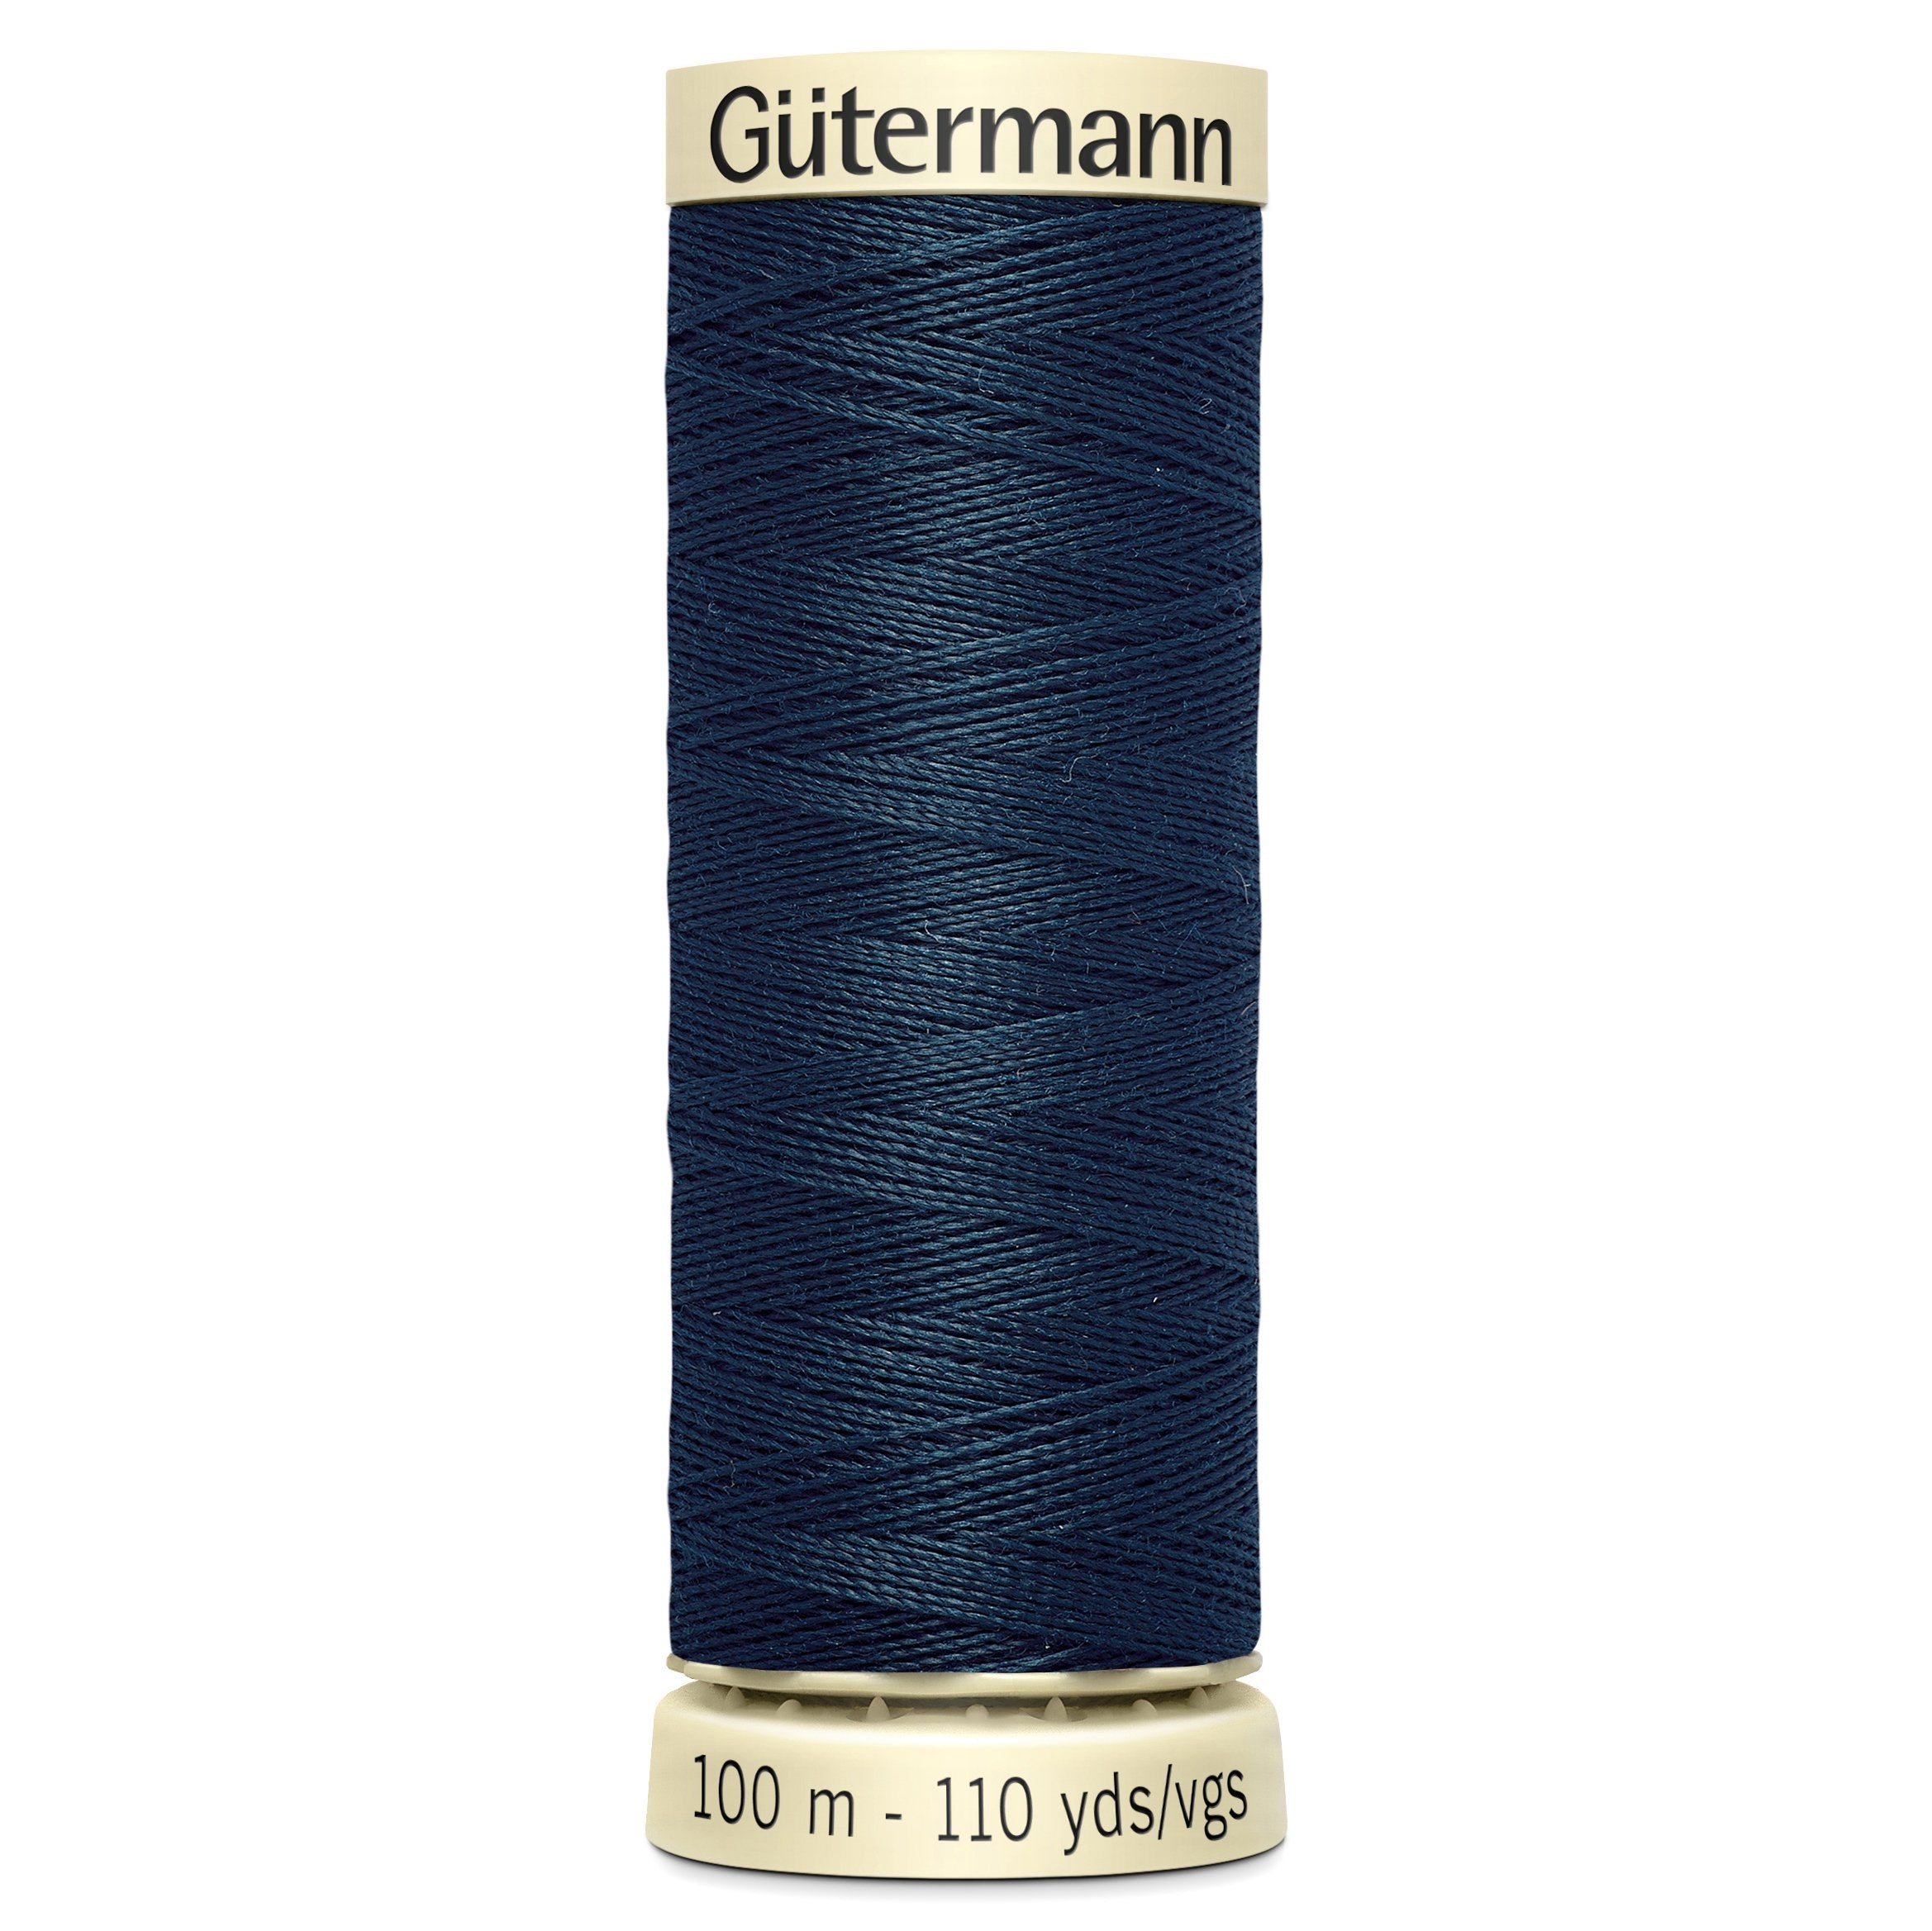 Gutermann Sew All Thread colour 764 Very Dark Turquoise from Jaycotts Sewing Supplies